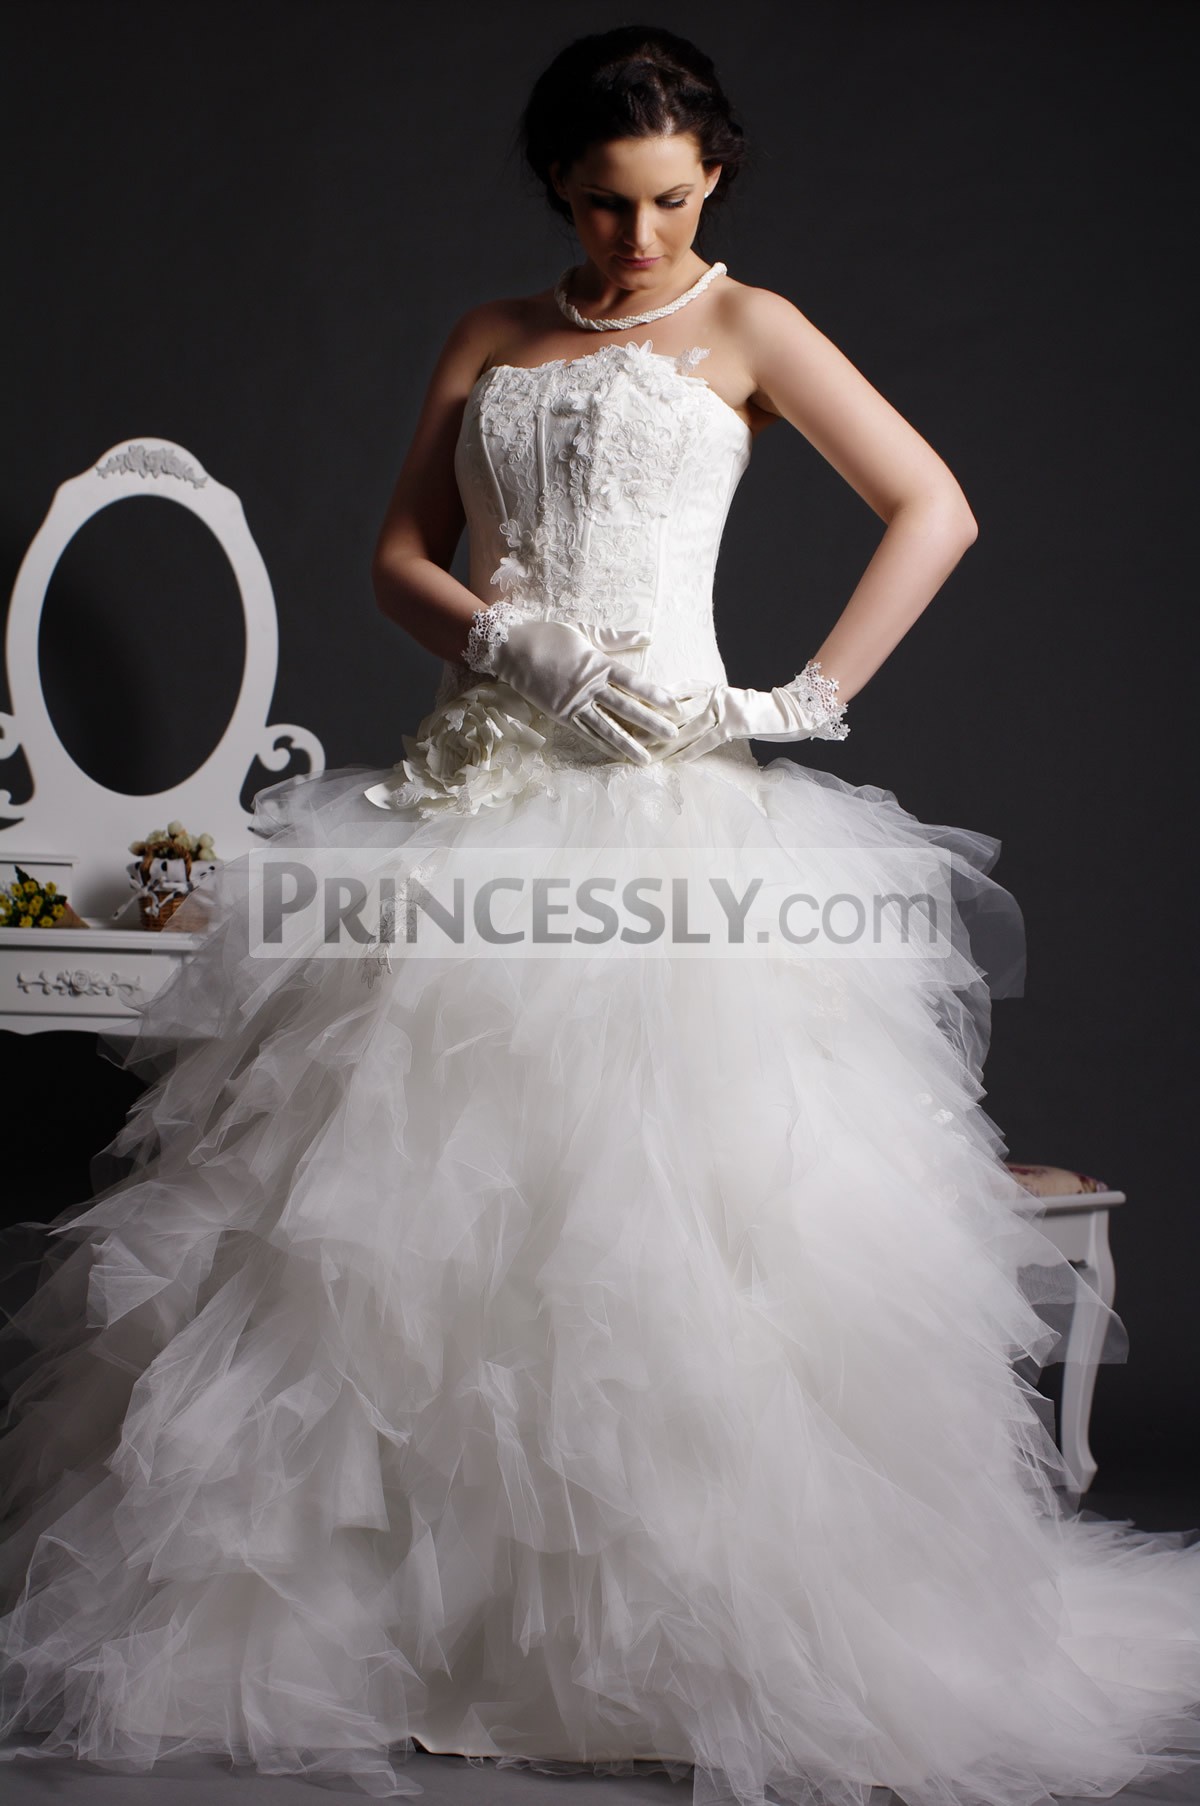 Modern Ball Gown Strapless Lace Appliqued Drop Waist Feathered Tiers Court Tulle Bridal Dress